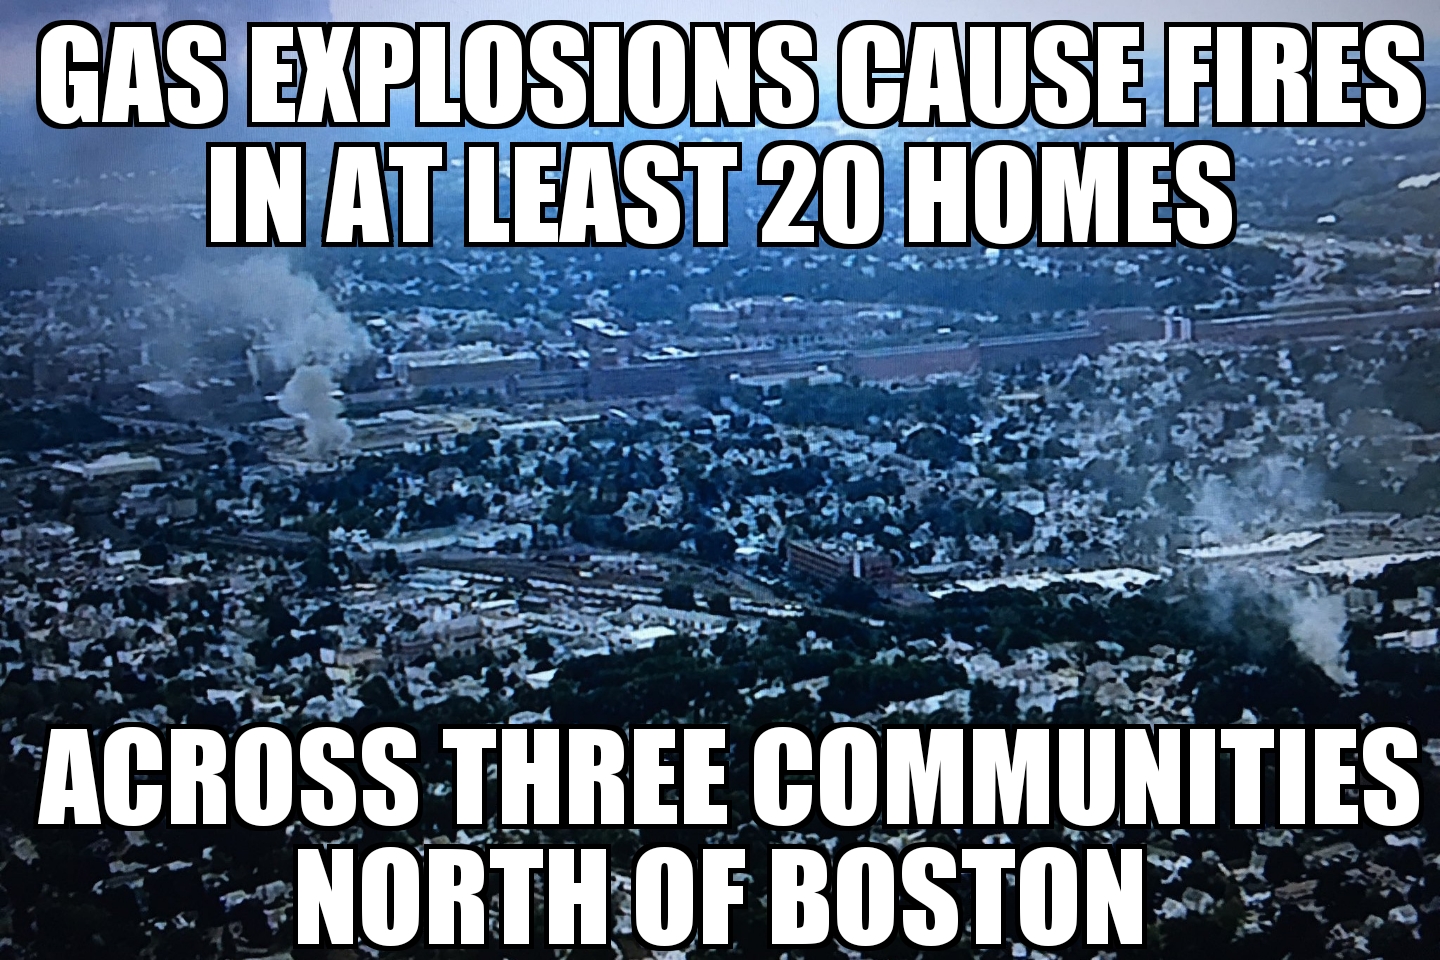 Gas explosions north of Boston